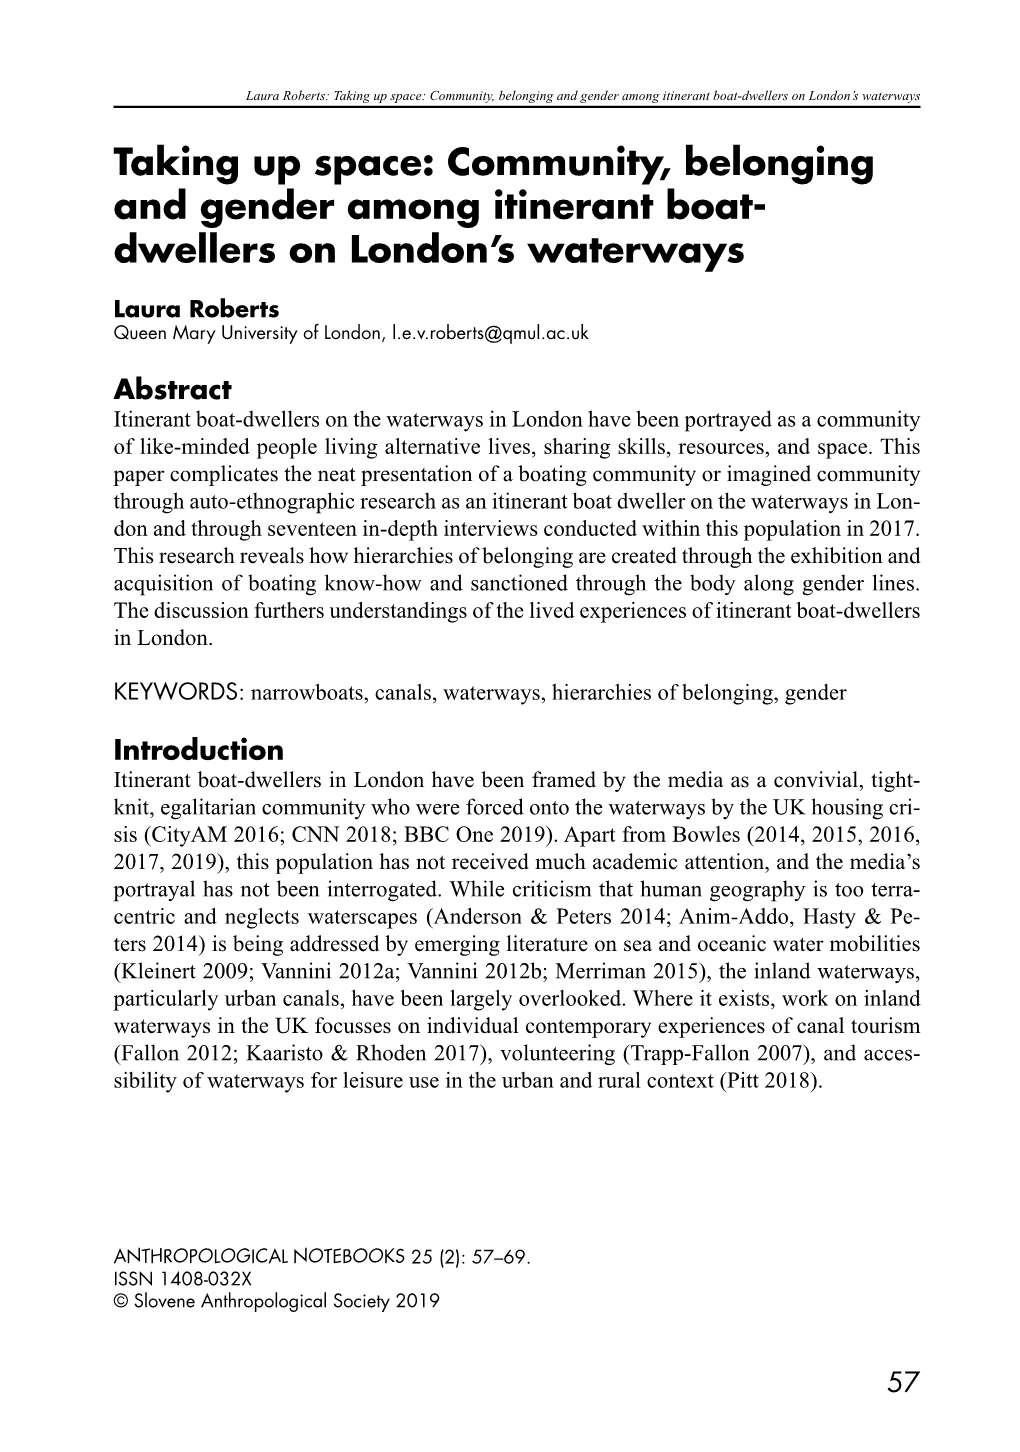 Community, Belonging and Gender Among Itinerant Boat- Dwellers on London’S Waterways